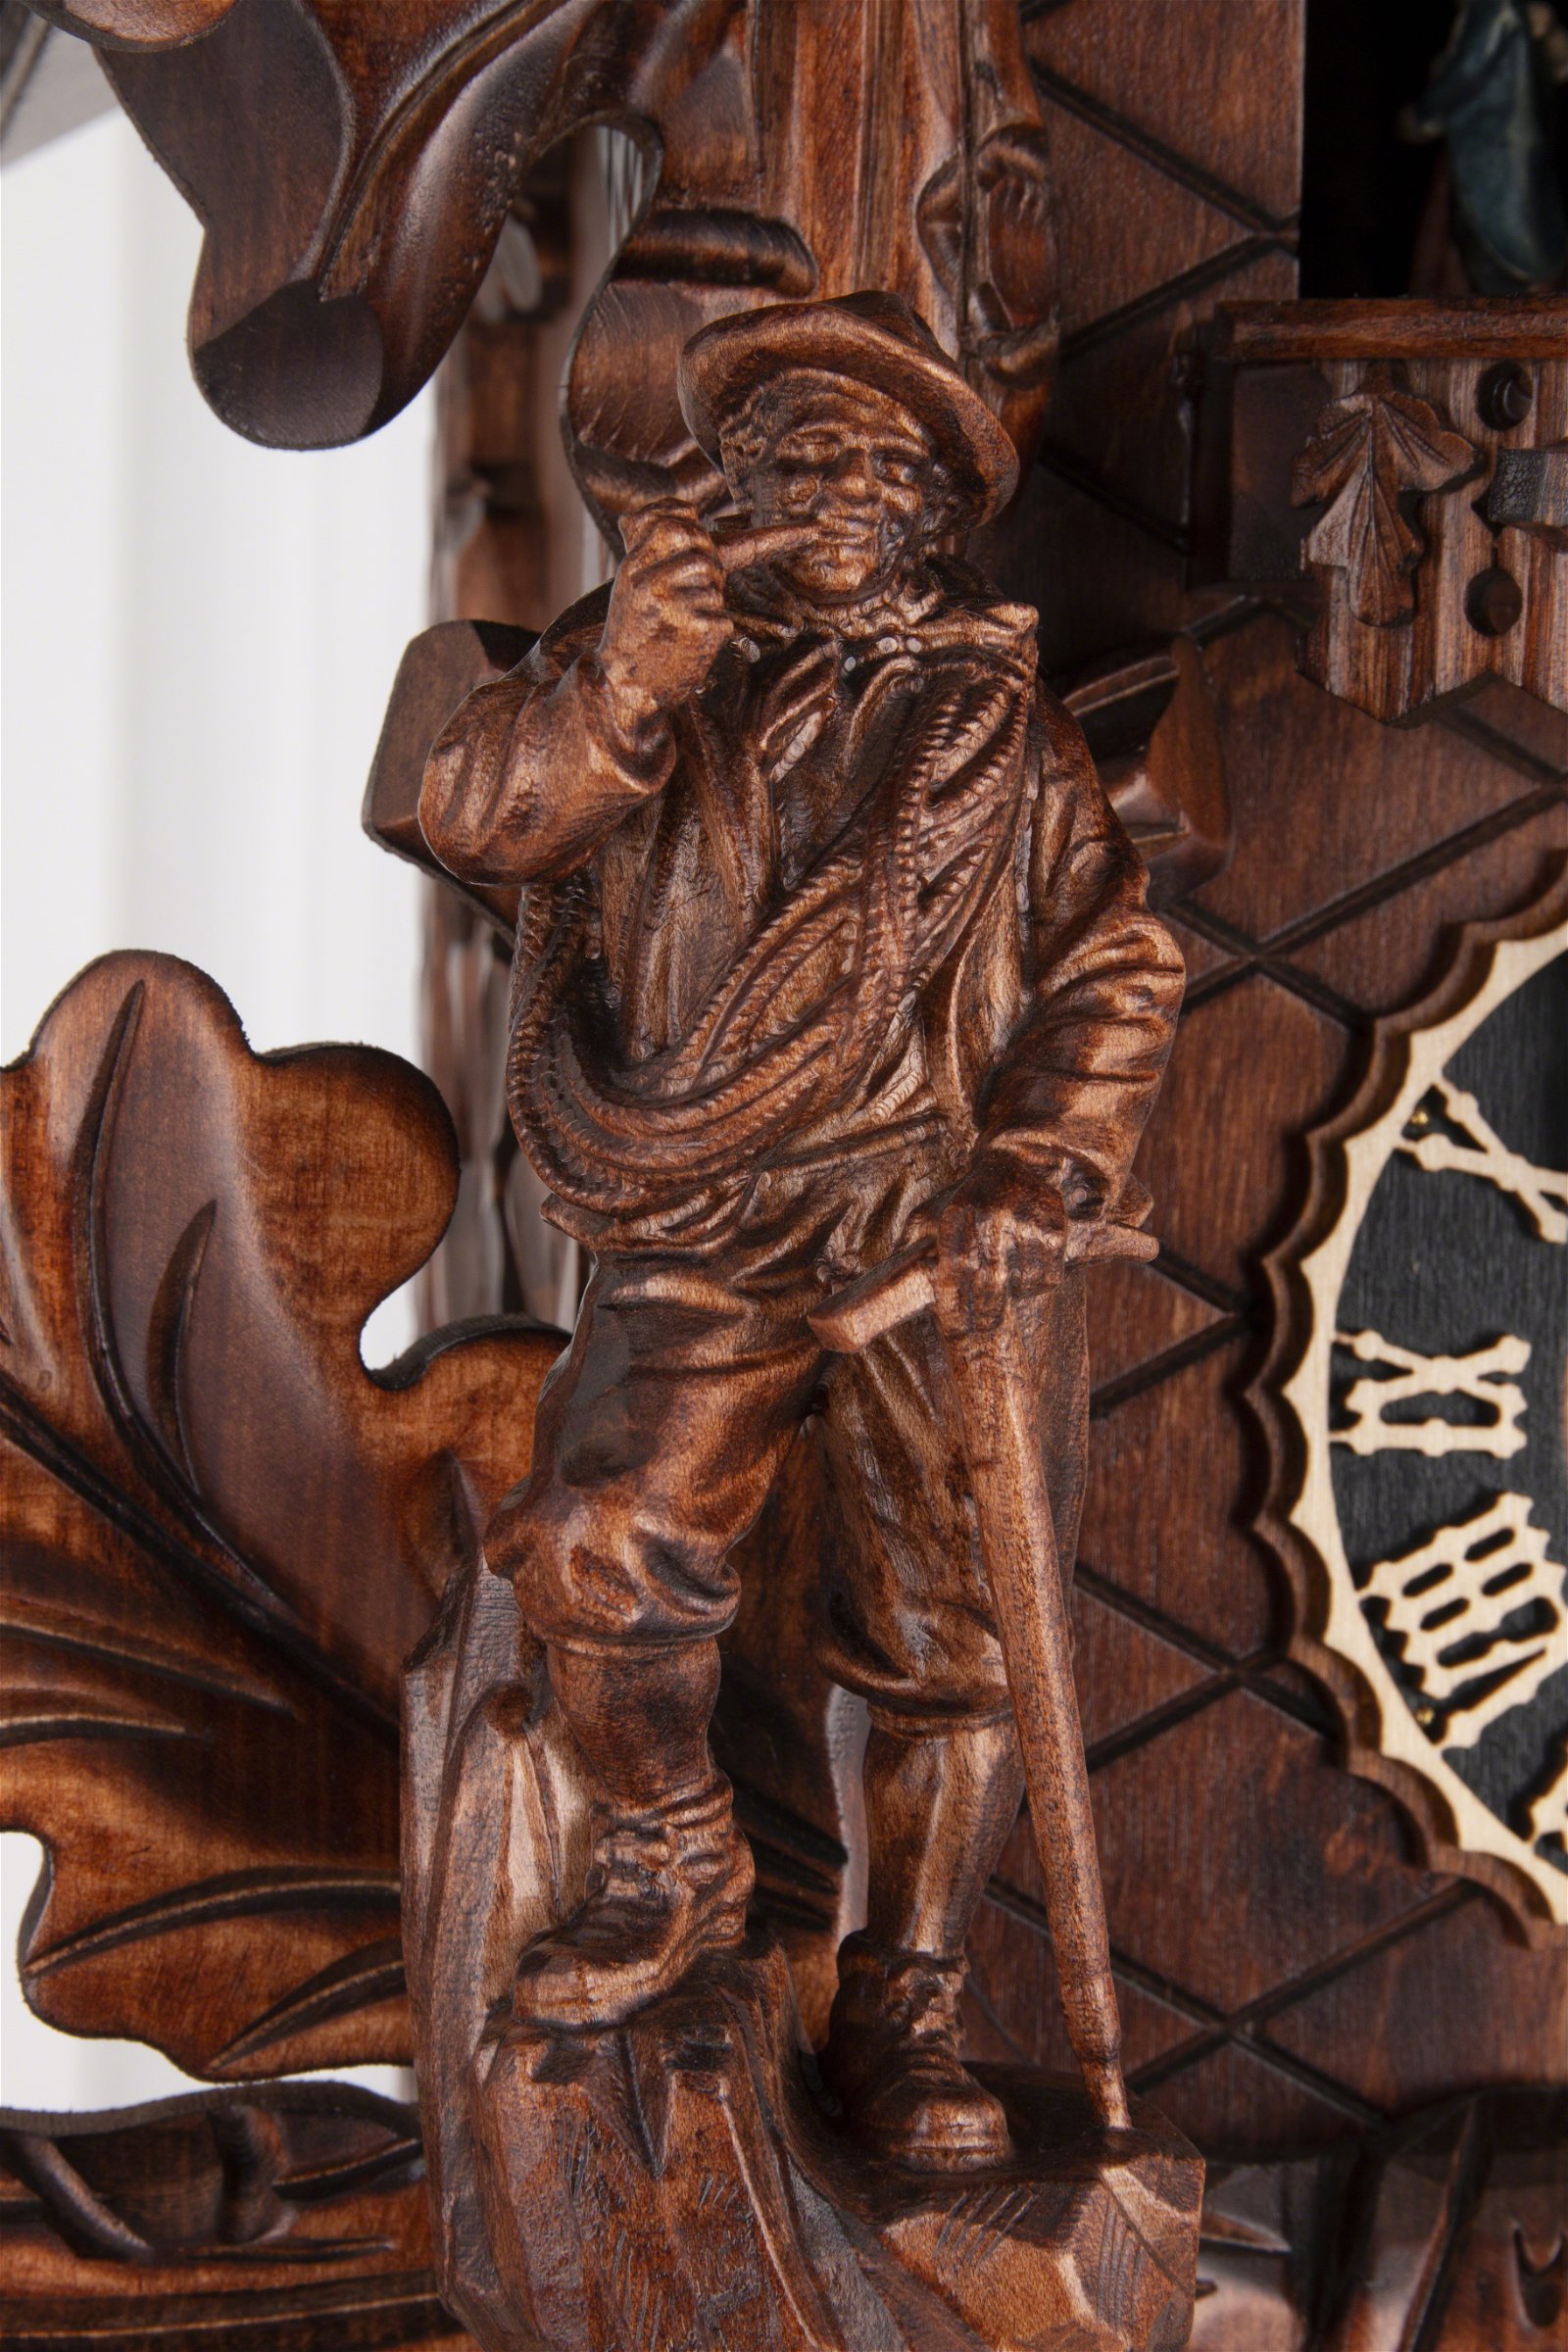 Cuckoo Clock 8-day-movement Carved-Style 41cm by Hönes